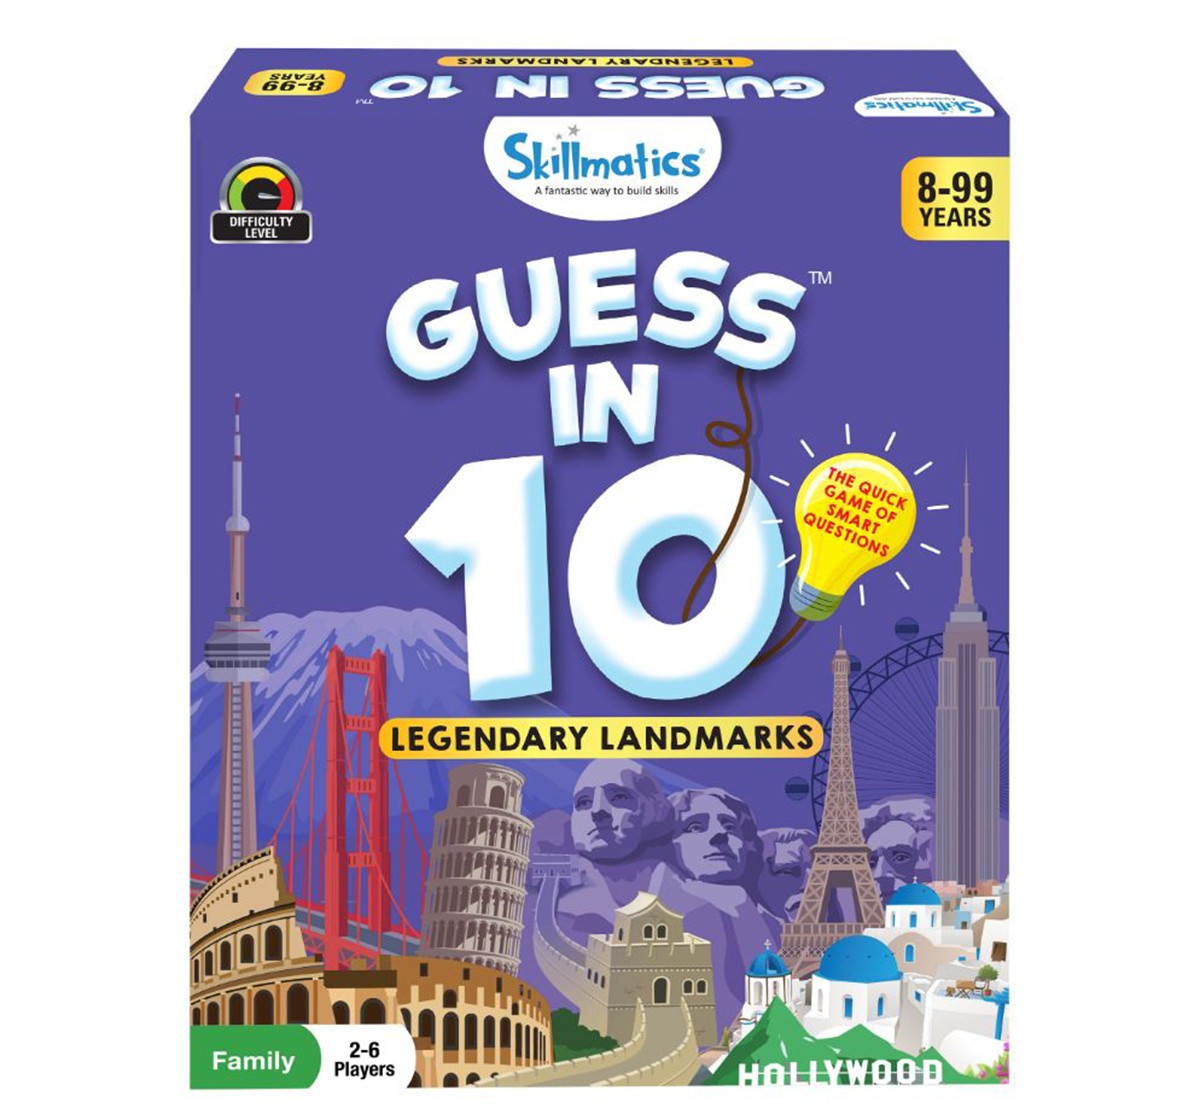 Skillmatics Guess in 10 Legendary Landmarks Paper card game Multicolor 3Y+